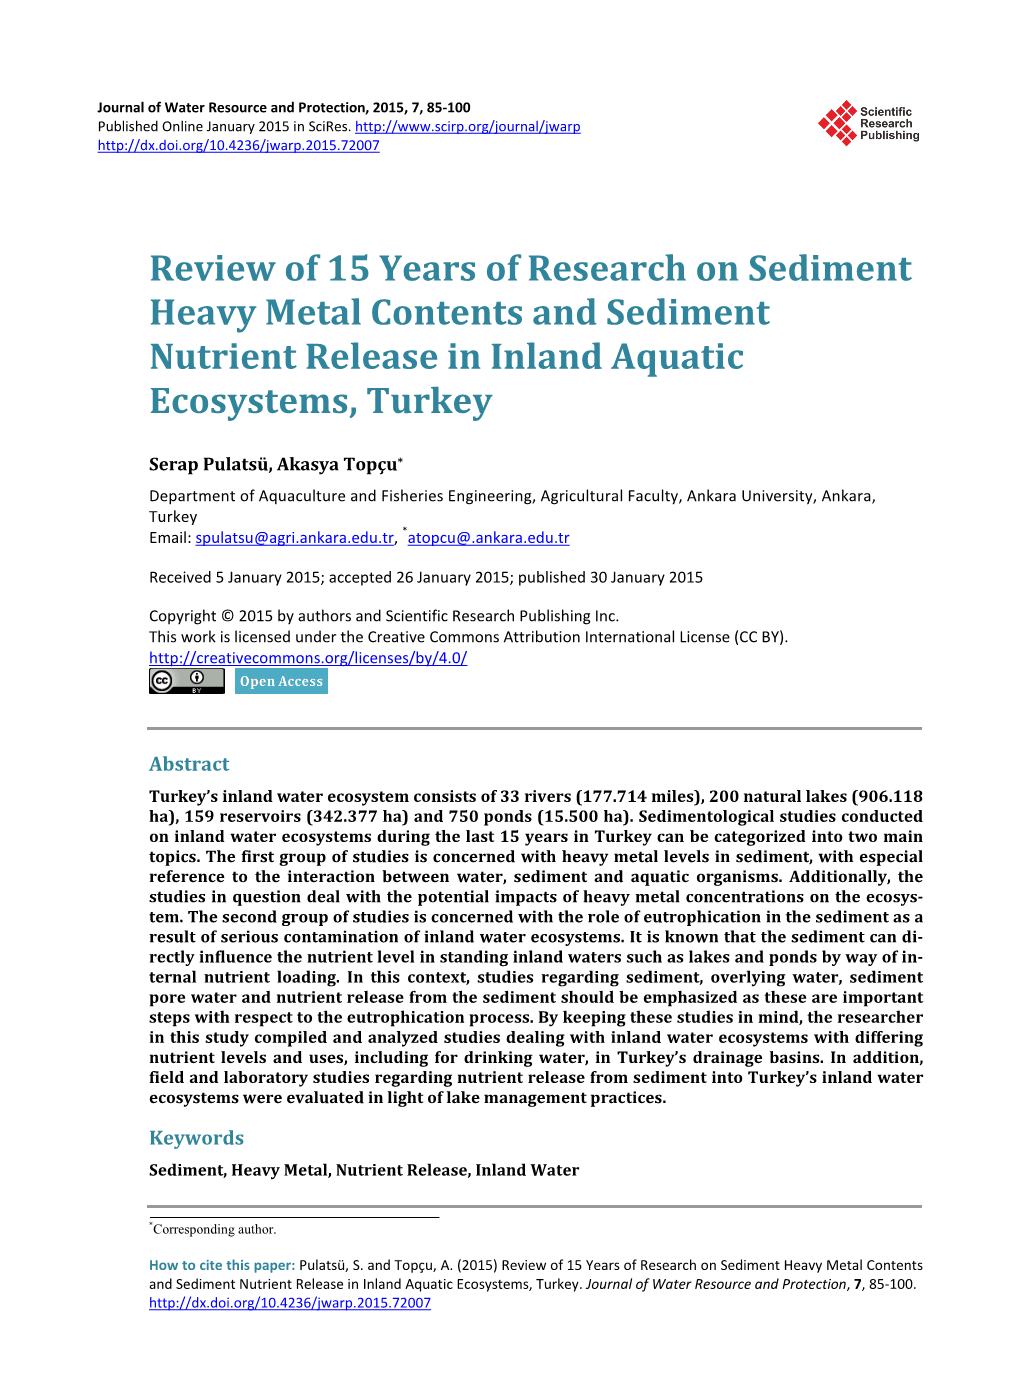 Review of 15 Years of Research on Sediment Heavy Metal Contents and Sediment Nutrient Release in Inland Aquatic Ecosystems, Turkey